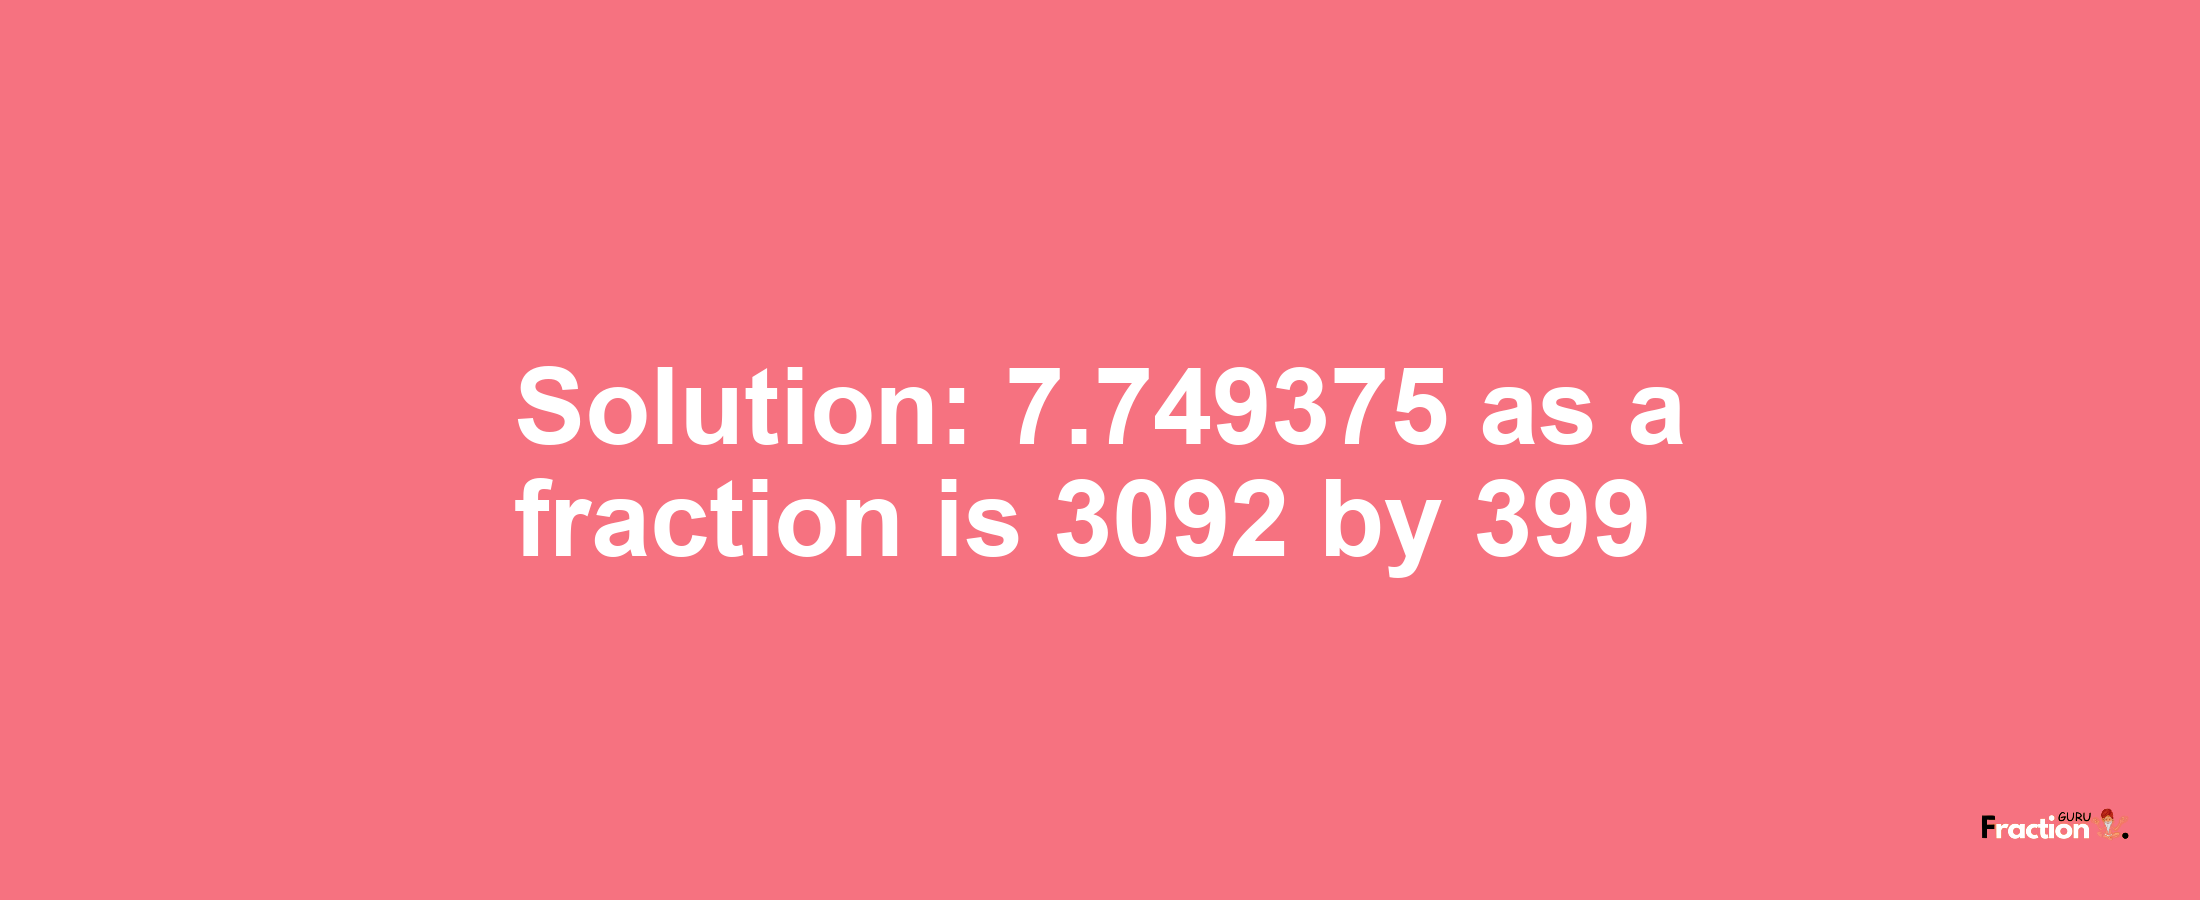 Solution:7.749375 as a fraction is 3092/399